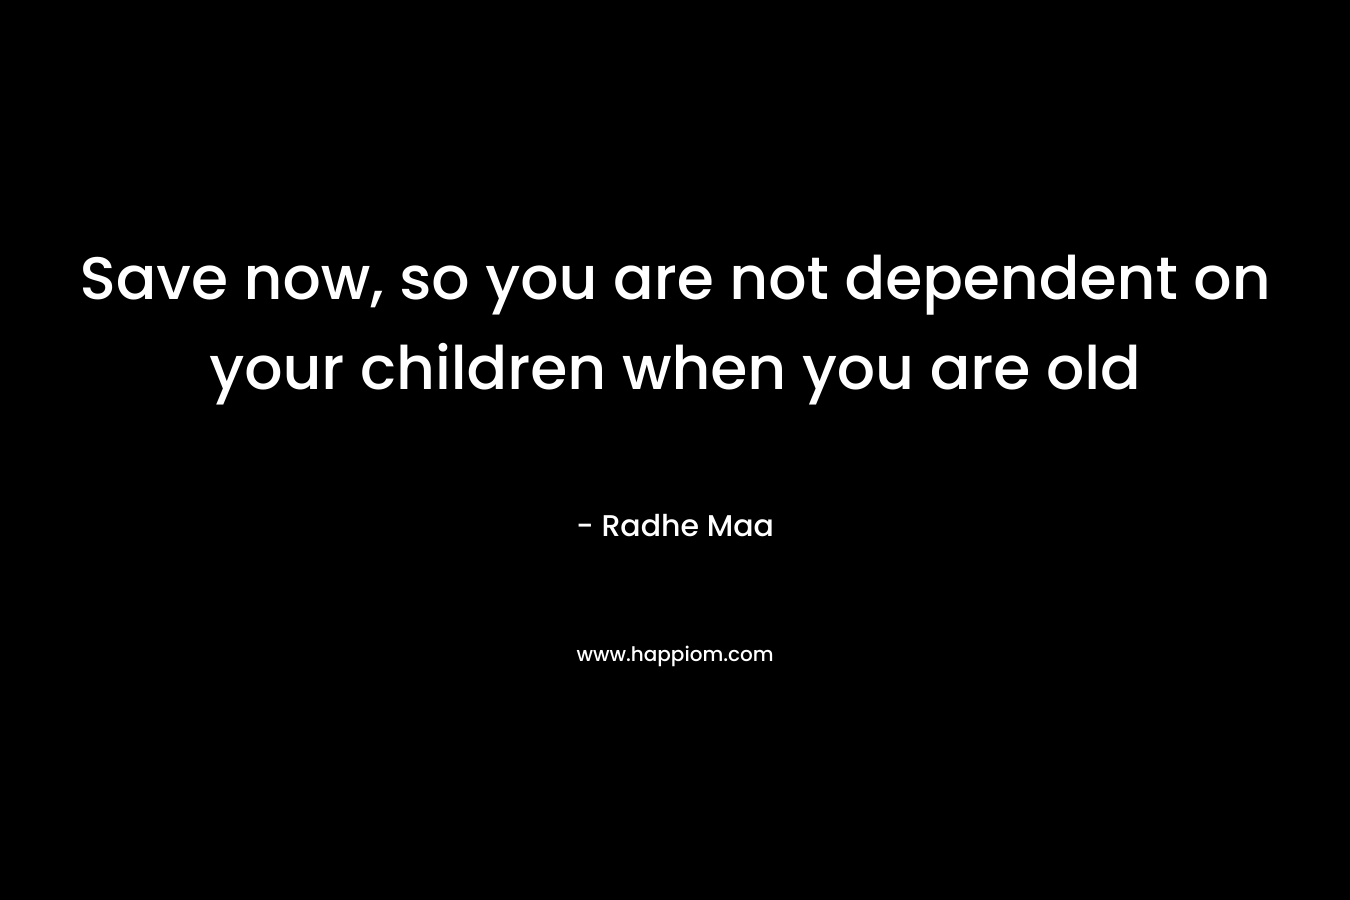 Save now, so you are not dependent on your children when you are old